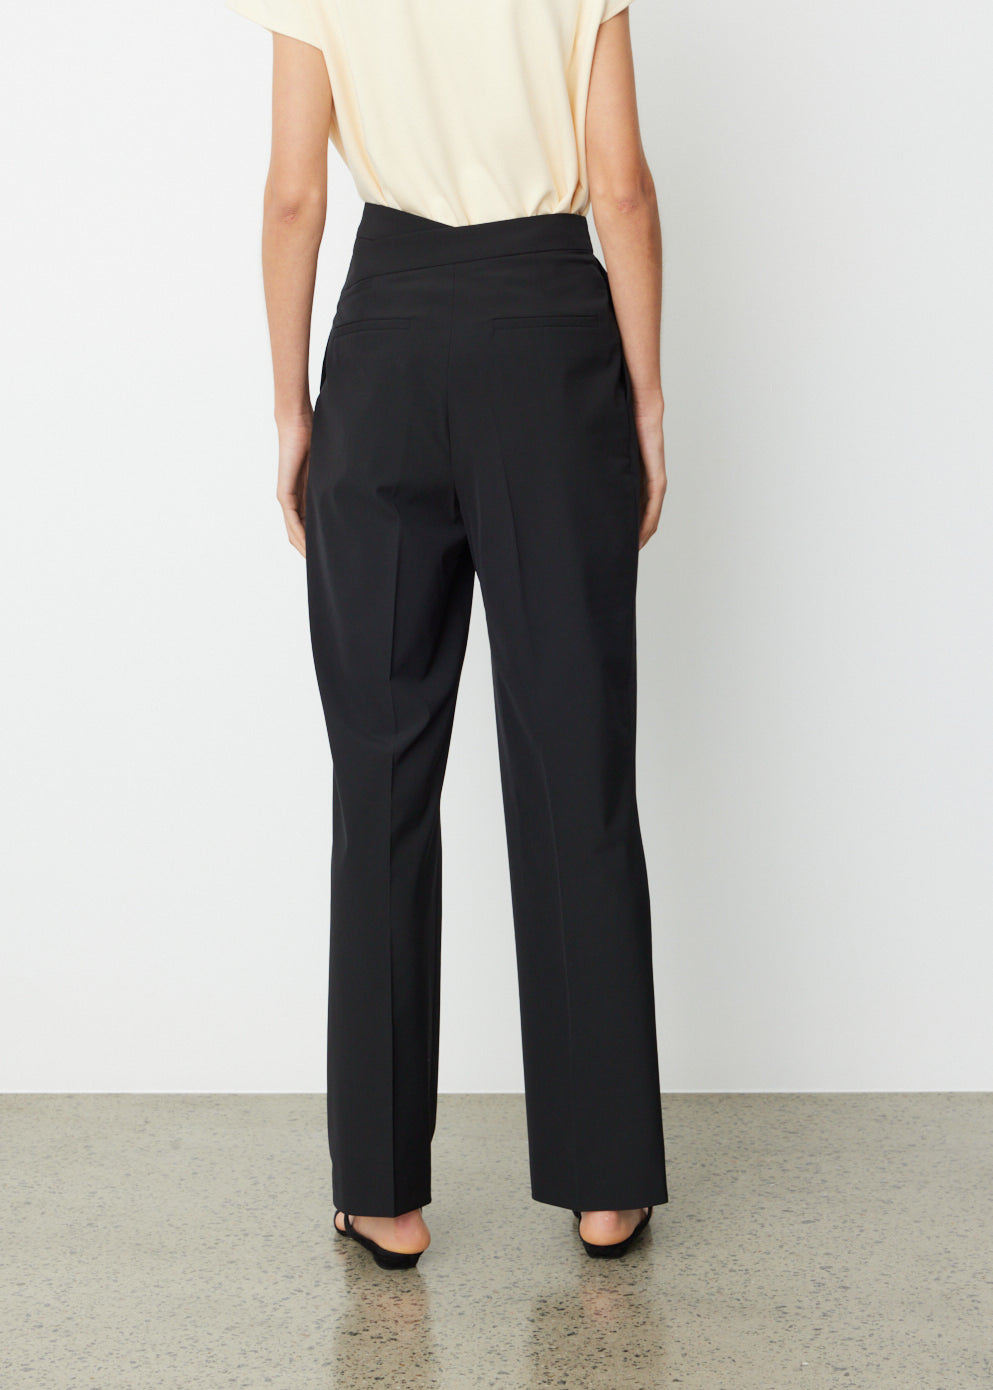 Siona Trousers